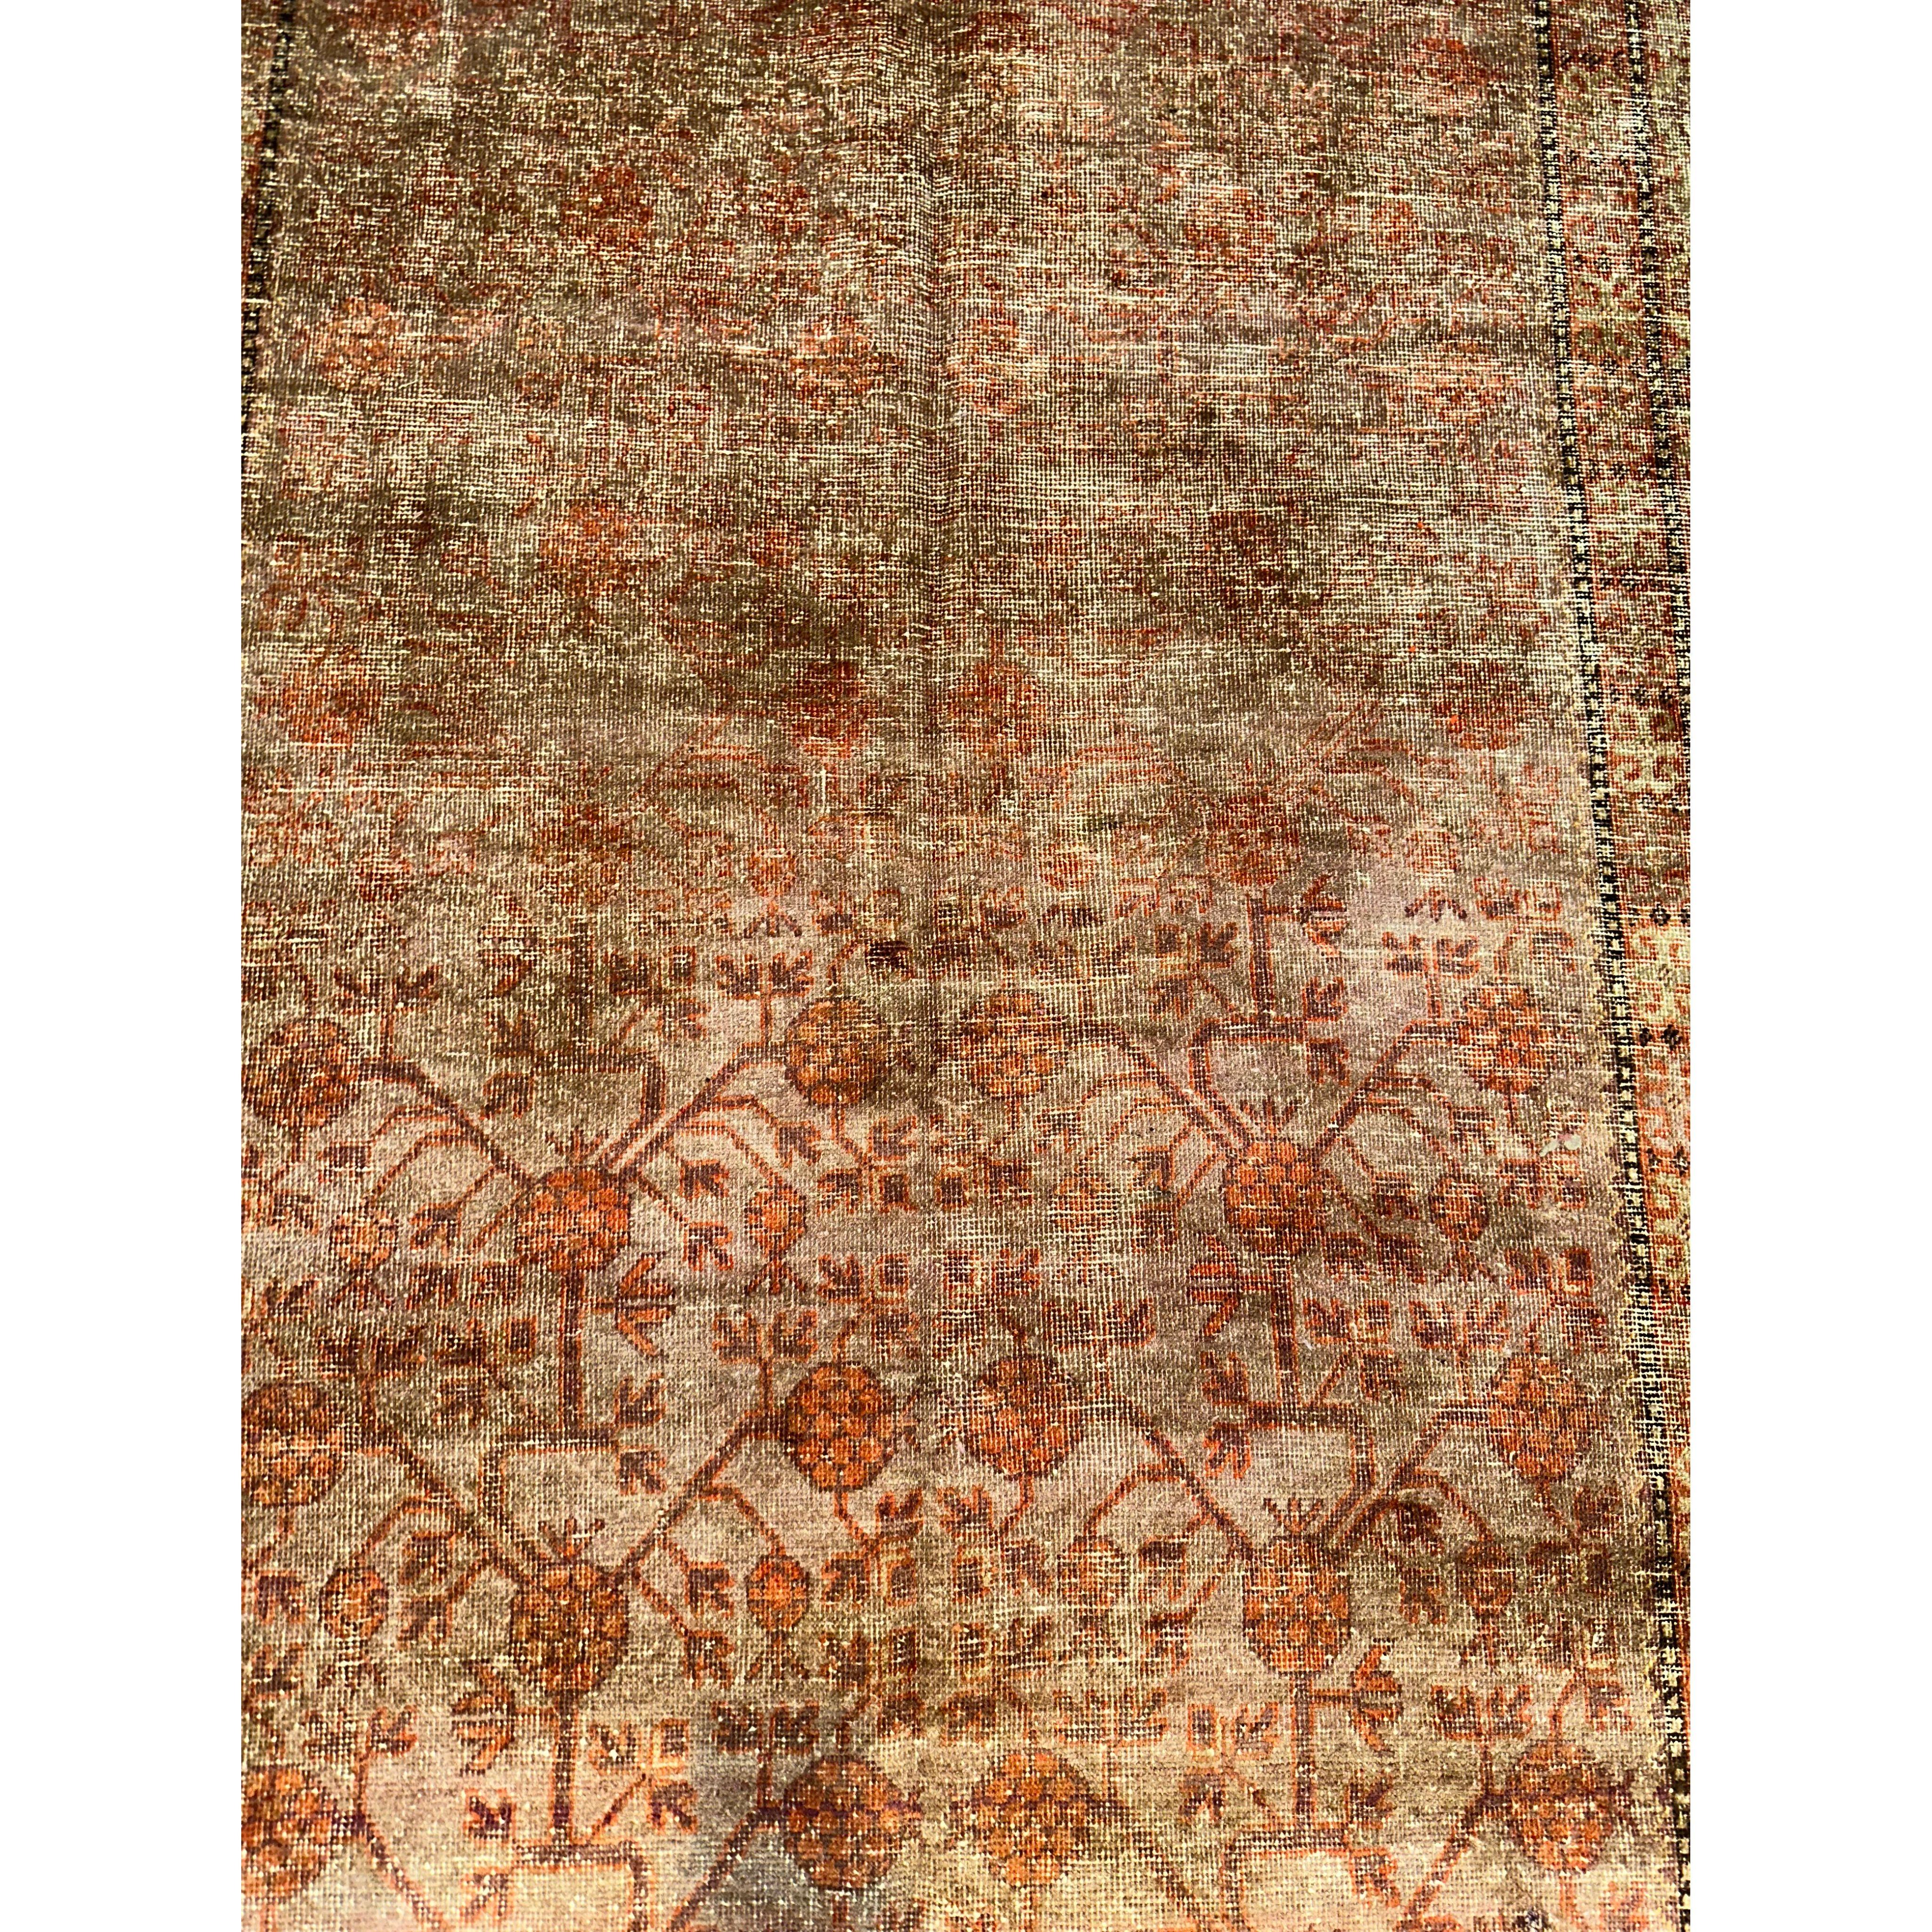 19th Century Muted Khotan Samarkand Rug In Good Condition For Sale In Los Angeles, US